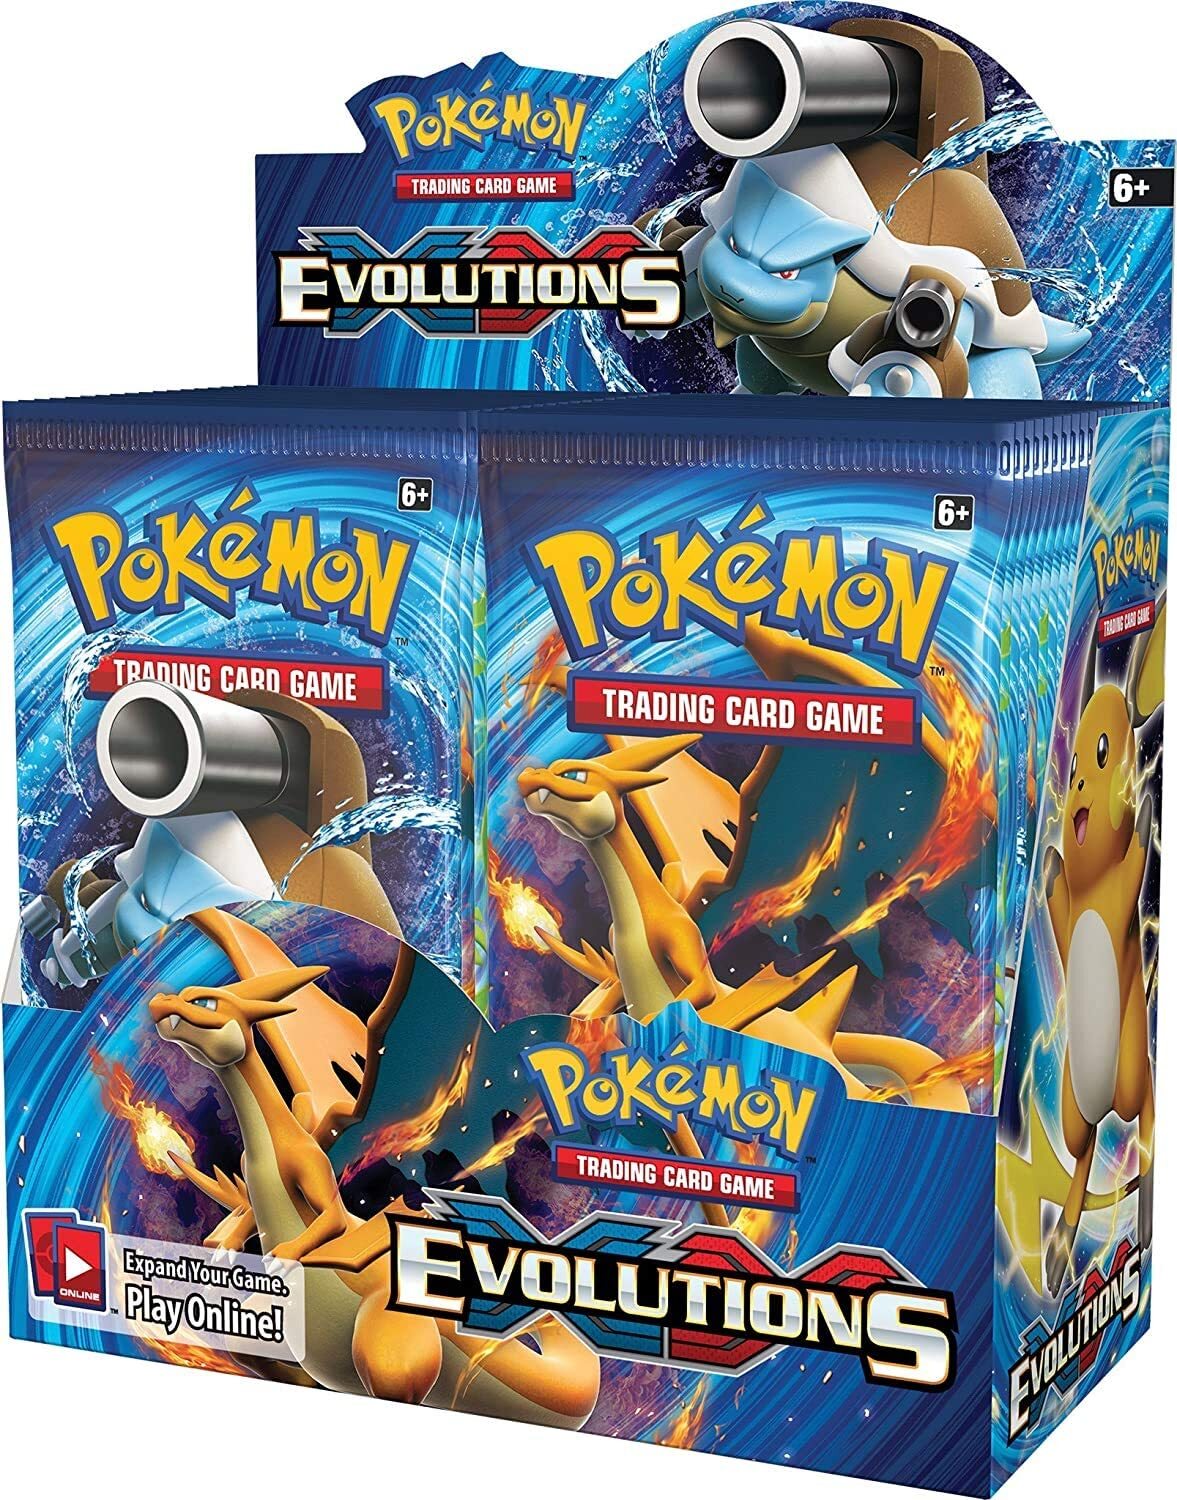 Pokemon XY Evolutions Booster Box BRAND NEW AND SEALED TCG 36 packs